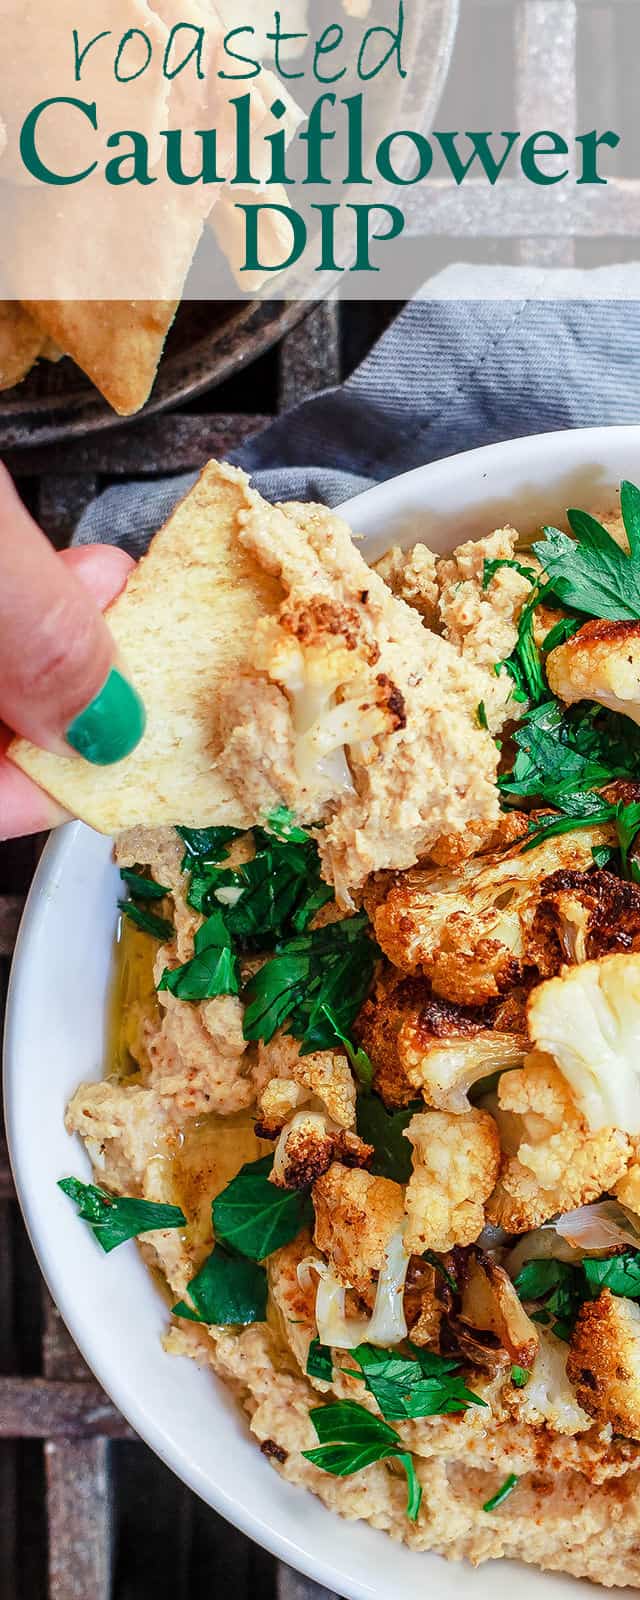 Roasted Cauliflower Tahini Dip | The Mediterranean Dish. A spicy Middle Eastern style dip with roasted cauliflowers, tahini paste, garlic and warm spices like turmeric and smoked paprika. A must try appetizer! See the step-by-step tutorial on The Mediterranean Dish.